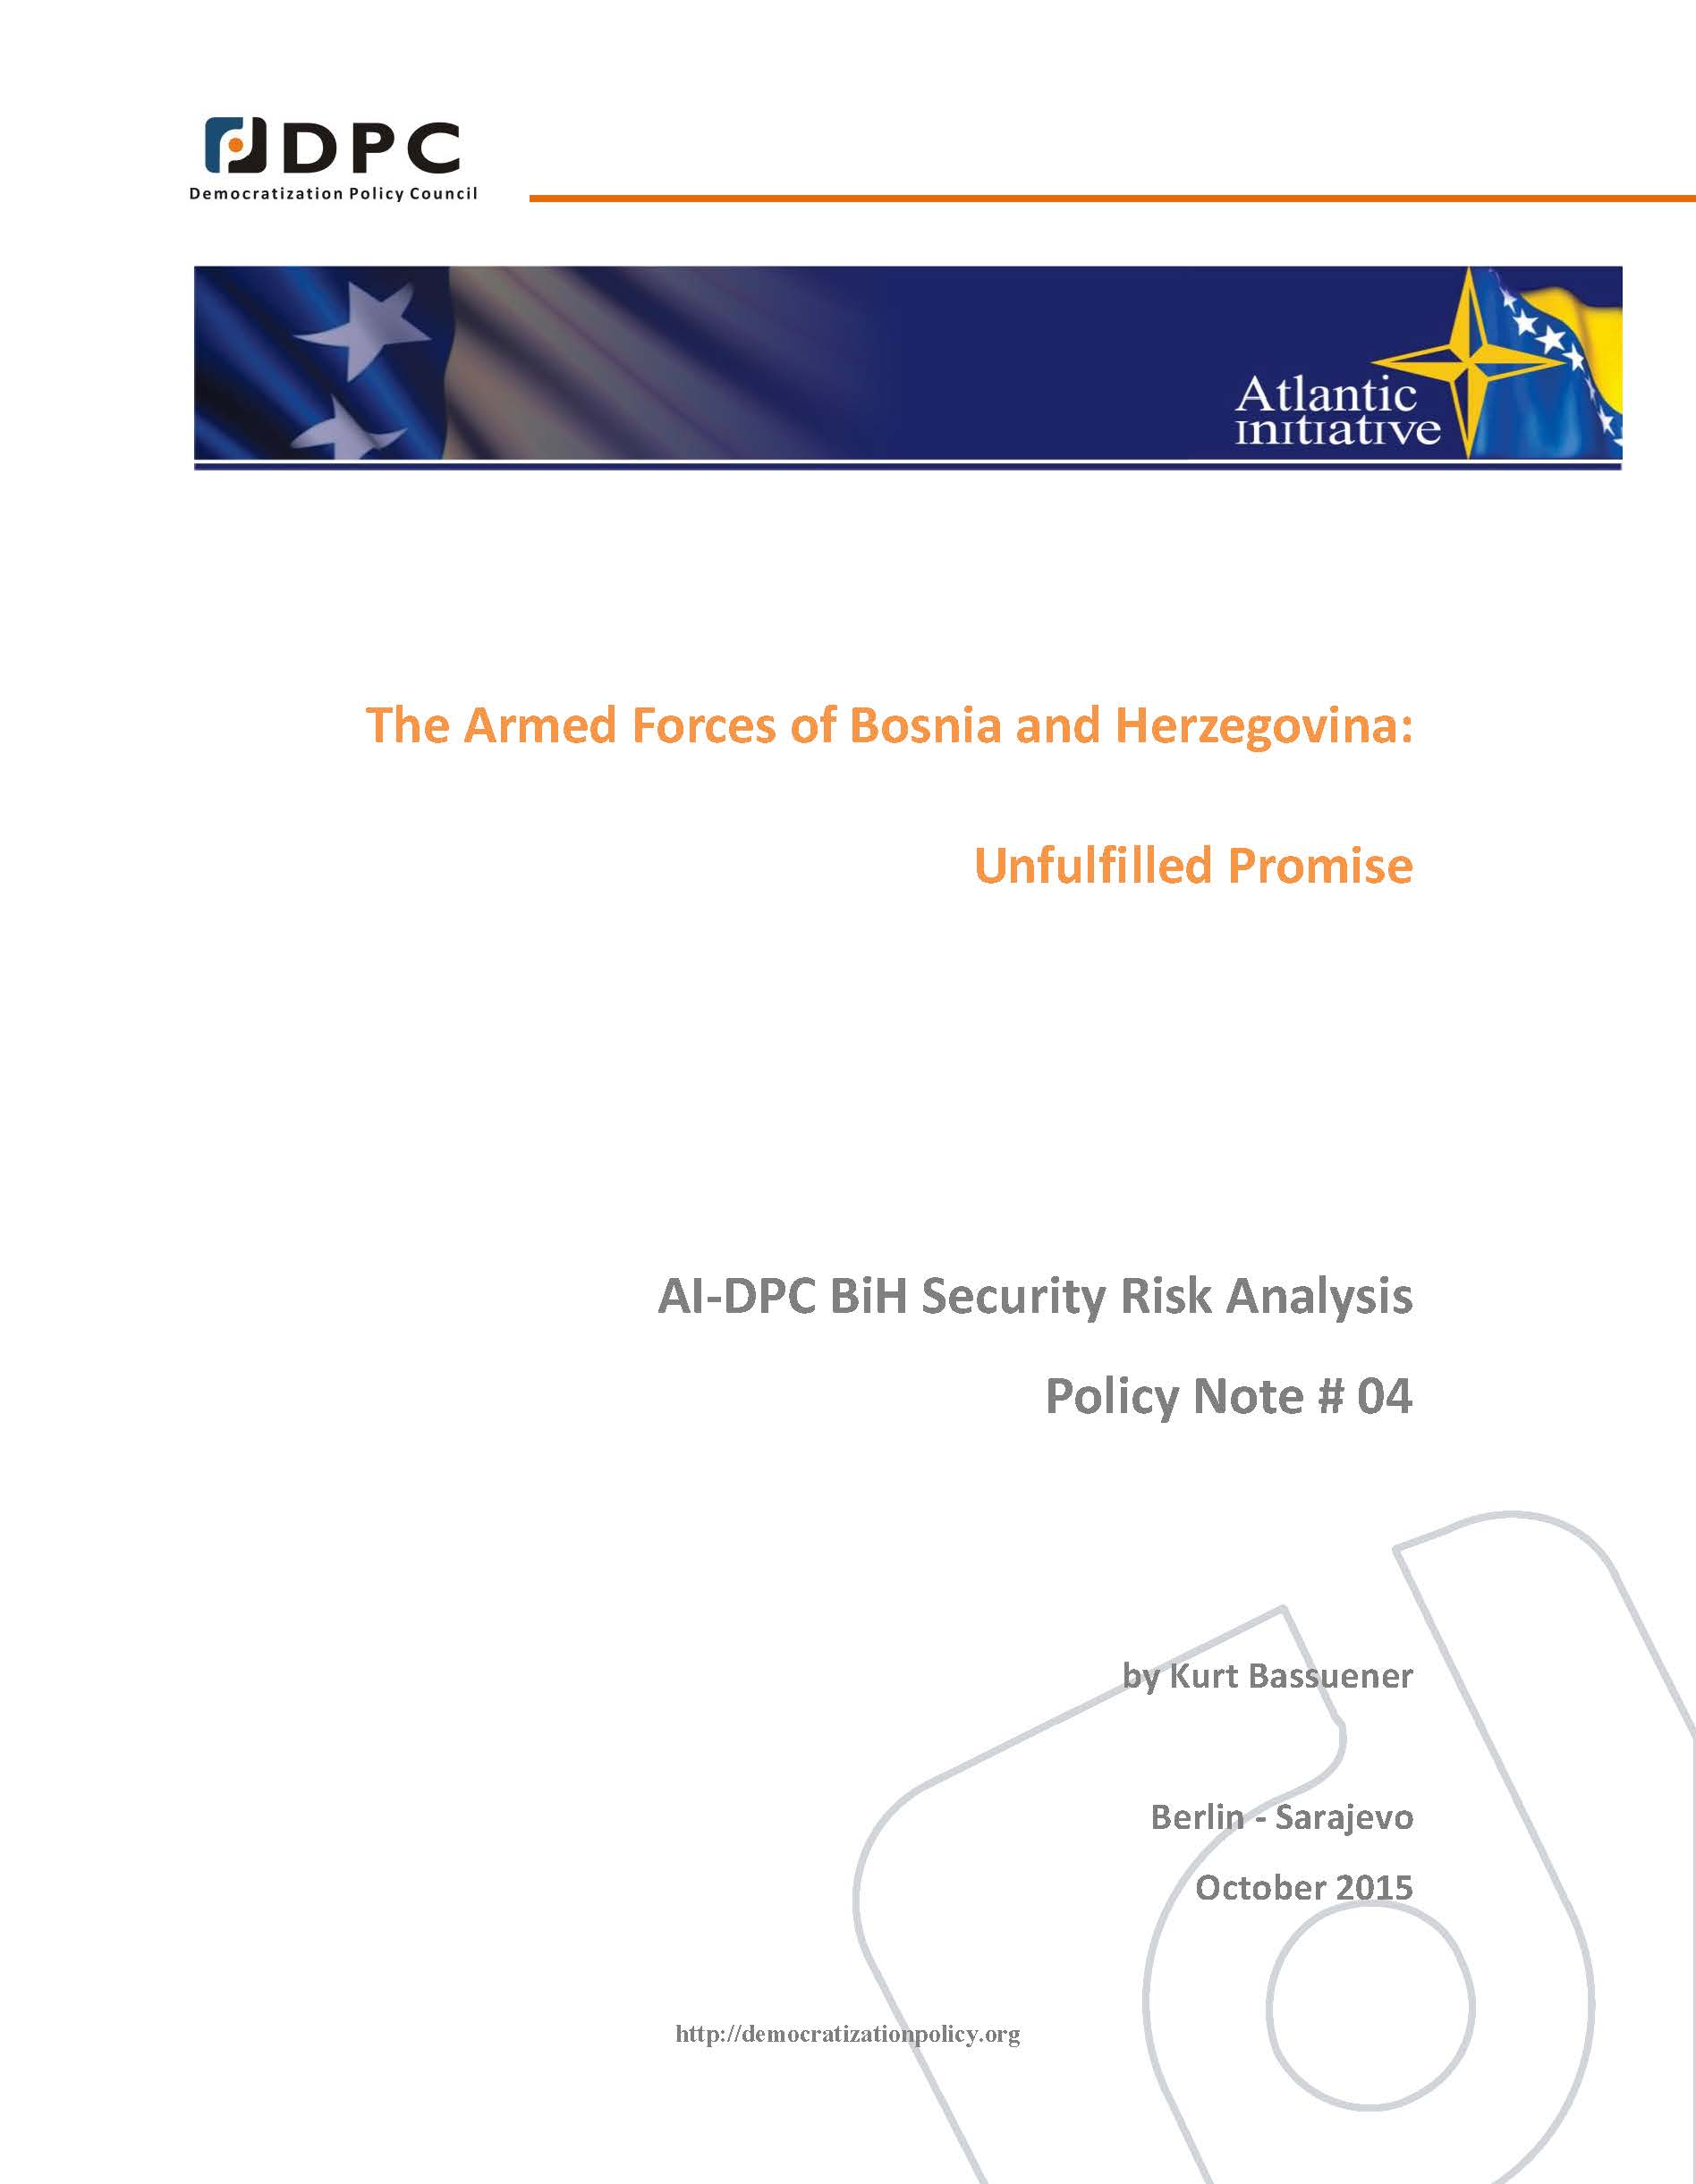 AI-DPC BiH SECURITY ANALYSIS POLICY NOTE 04: The Armed Forces of Bosnia and Herzegovina: Unfulfilled Promise